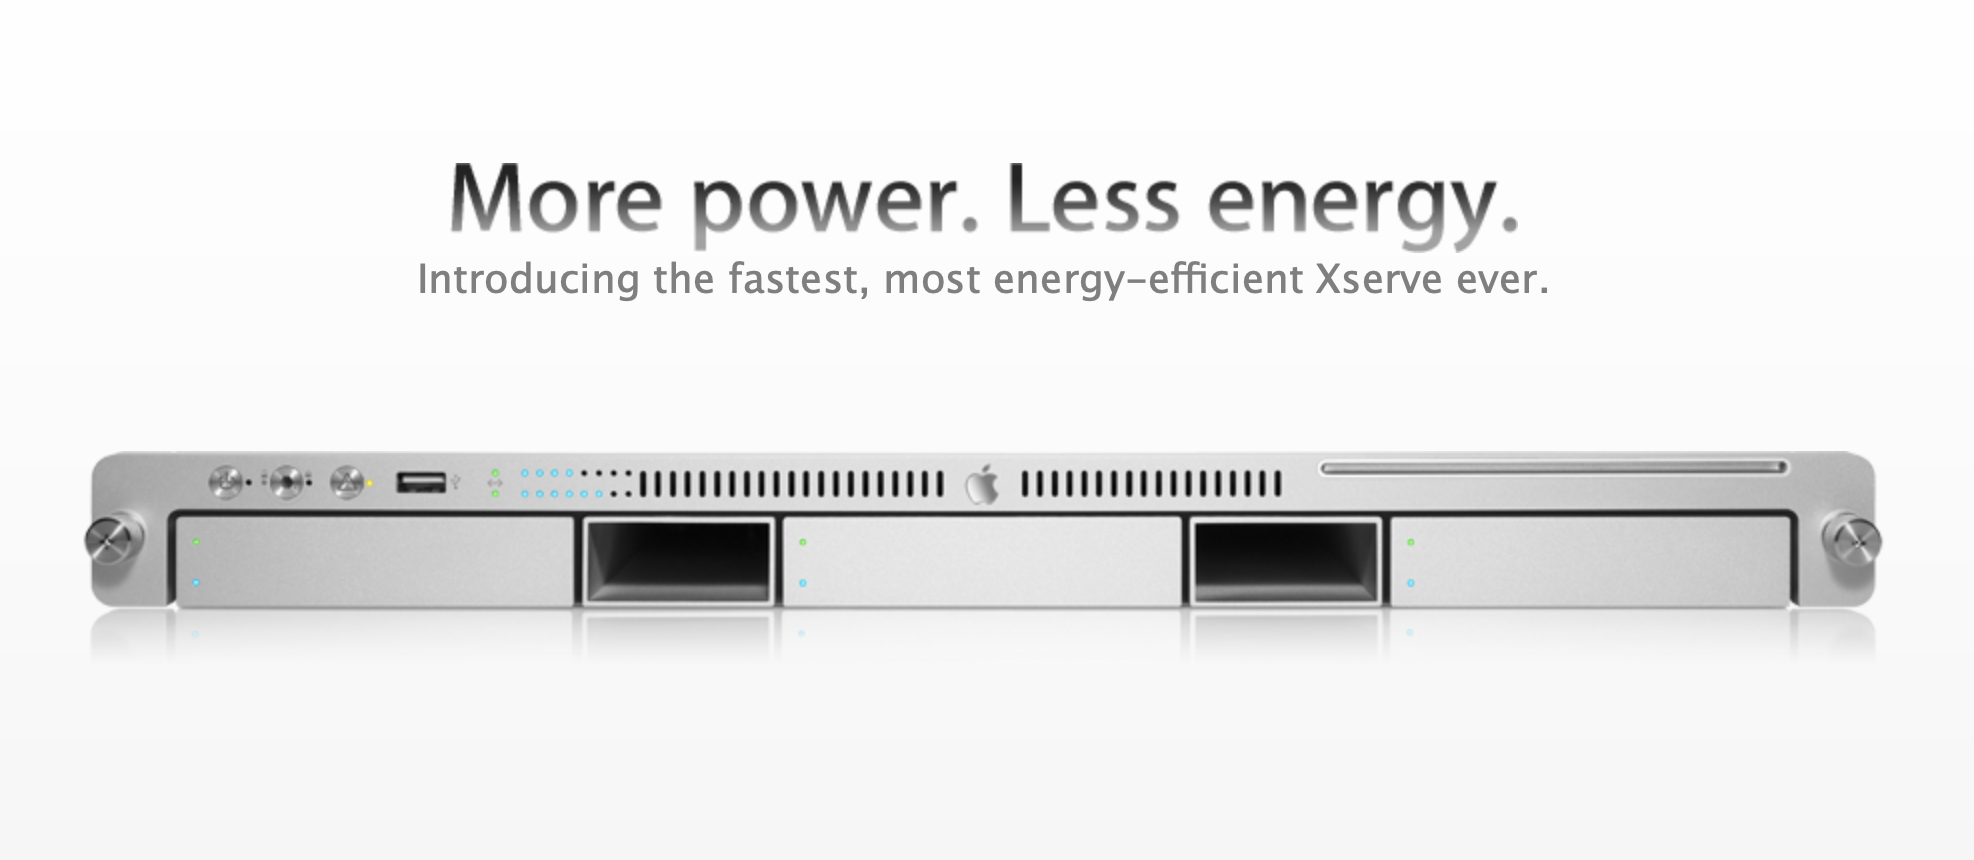 more power. less energy. introducing the fastest, most energy efficient xserve ever.